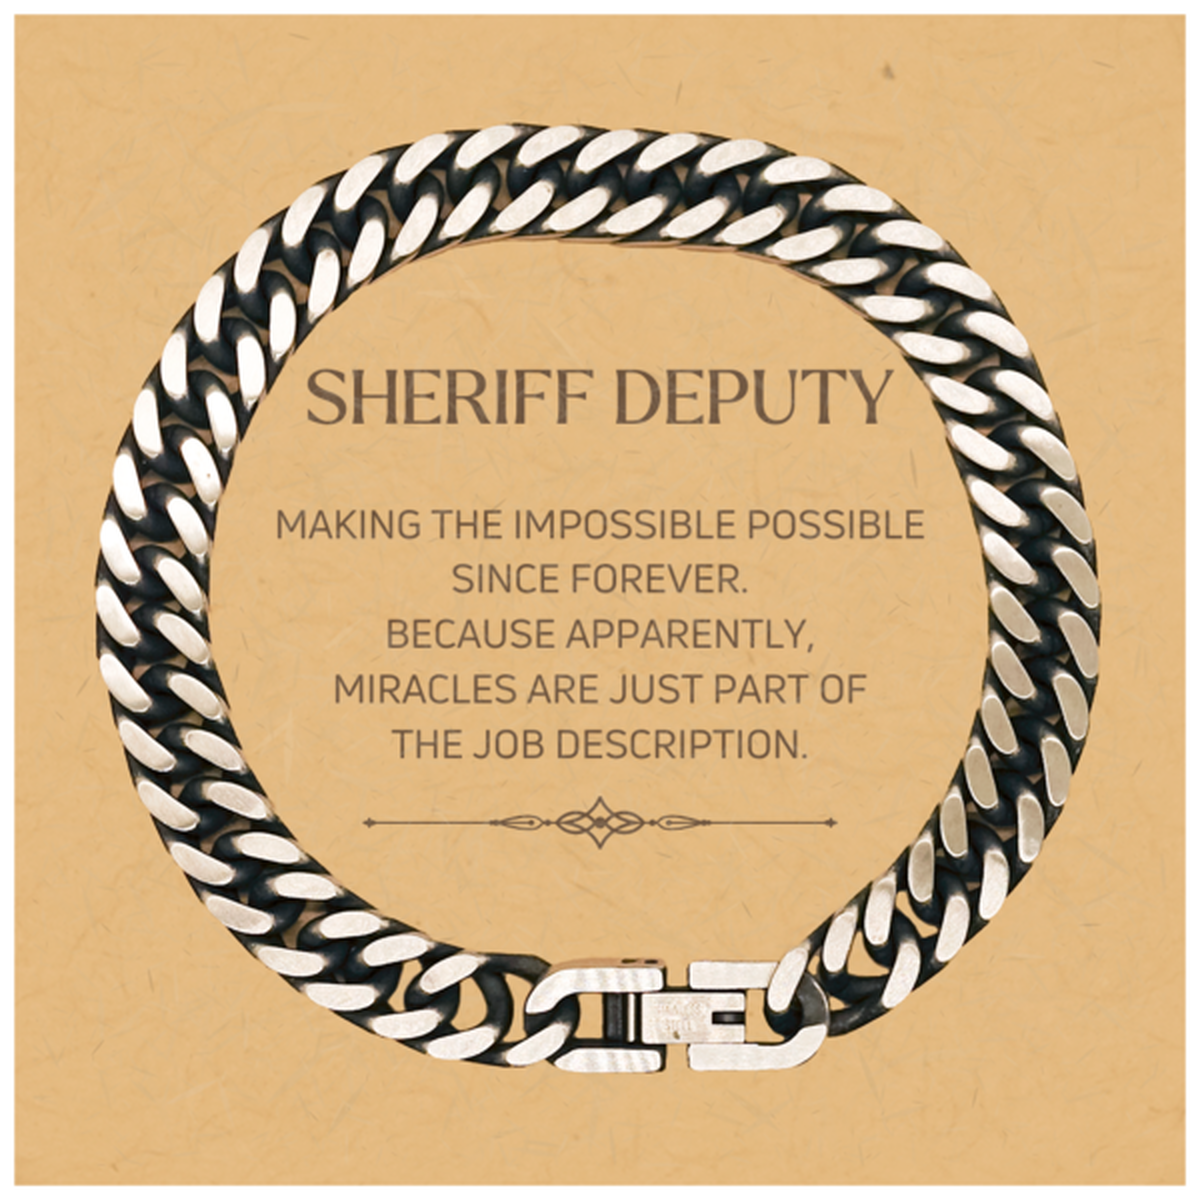 Funny Sheriff Deputy Gifts, Miracles are just part of the job description, Inspirational Birthday Christmas Cuban Link Chain Bracelet For Sheriff Deputy, Men, Women, Coworkers, Friends, Boss